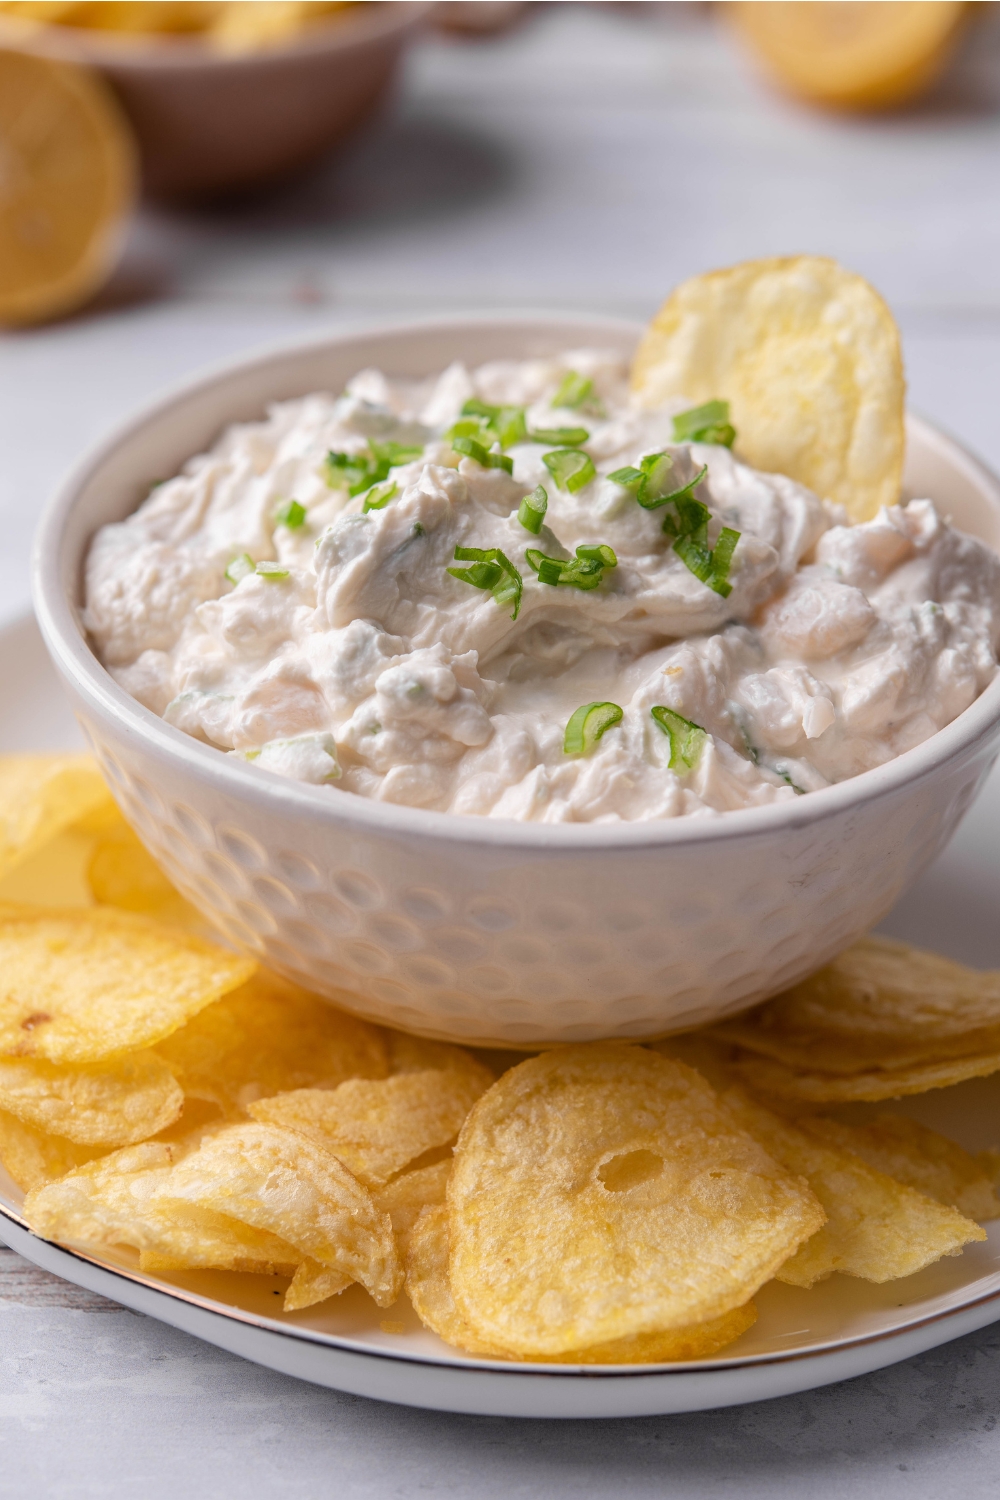 A small dip dish with clam dip in it being served on a plate with potato chips.